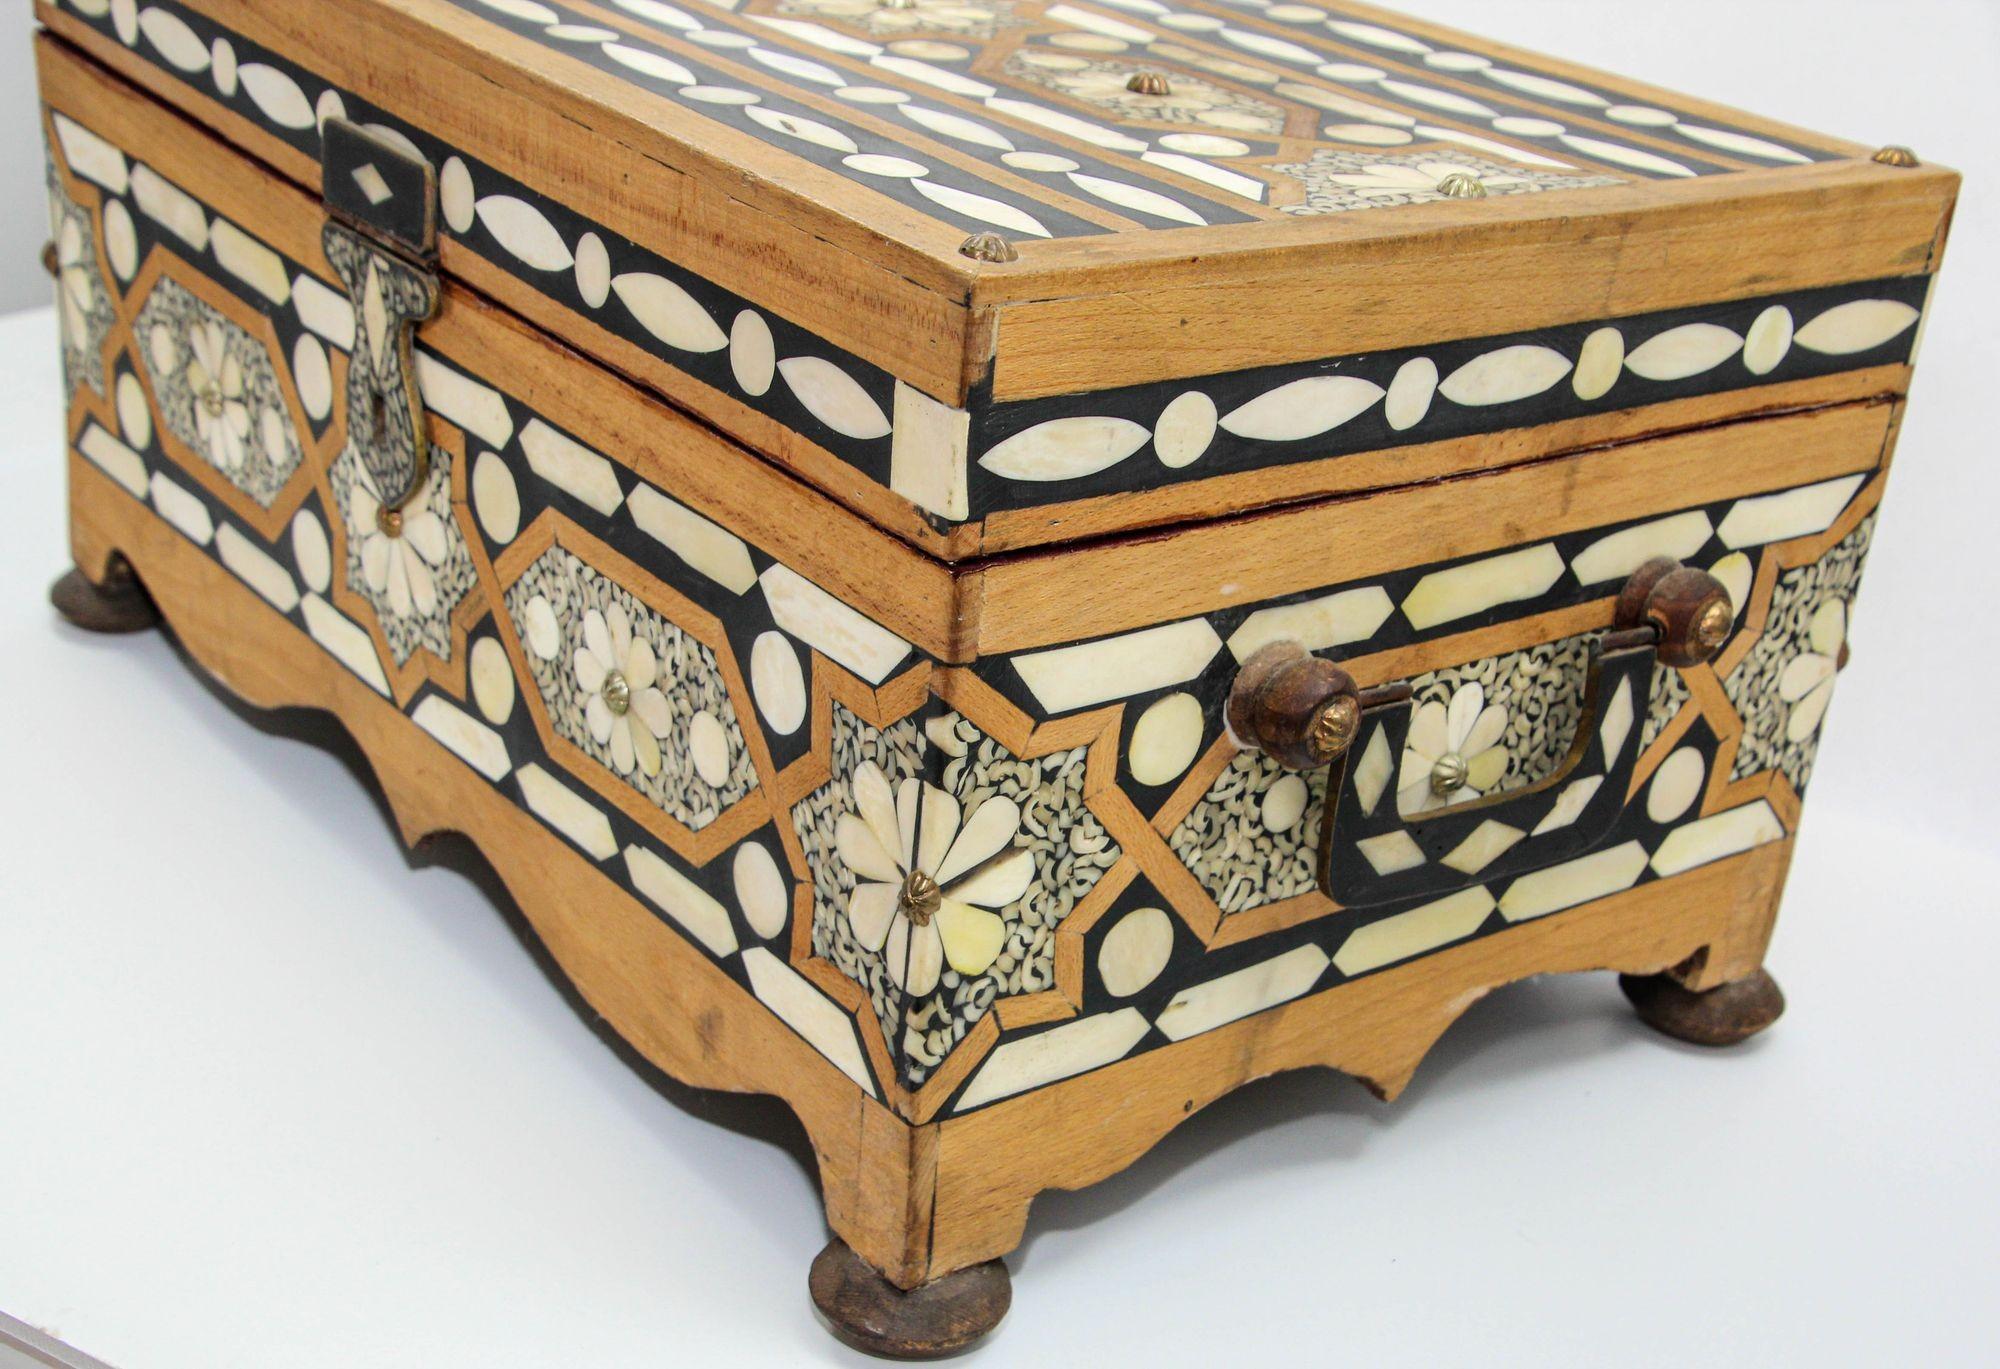 Antique handcrafted Moroccan jewelry wooden box with camel bone inlay trunk.
A large early 20th century decorative Moroccan camel bone casket with brass carrying handles on bun feet.
Magnificent large rectangular shape Moroccan dowry box decorated